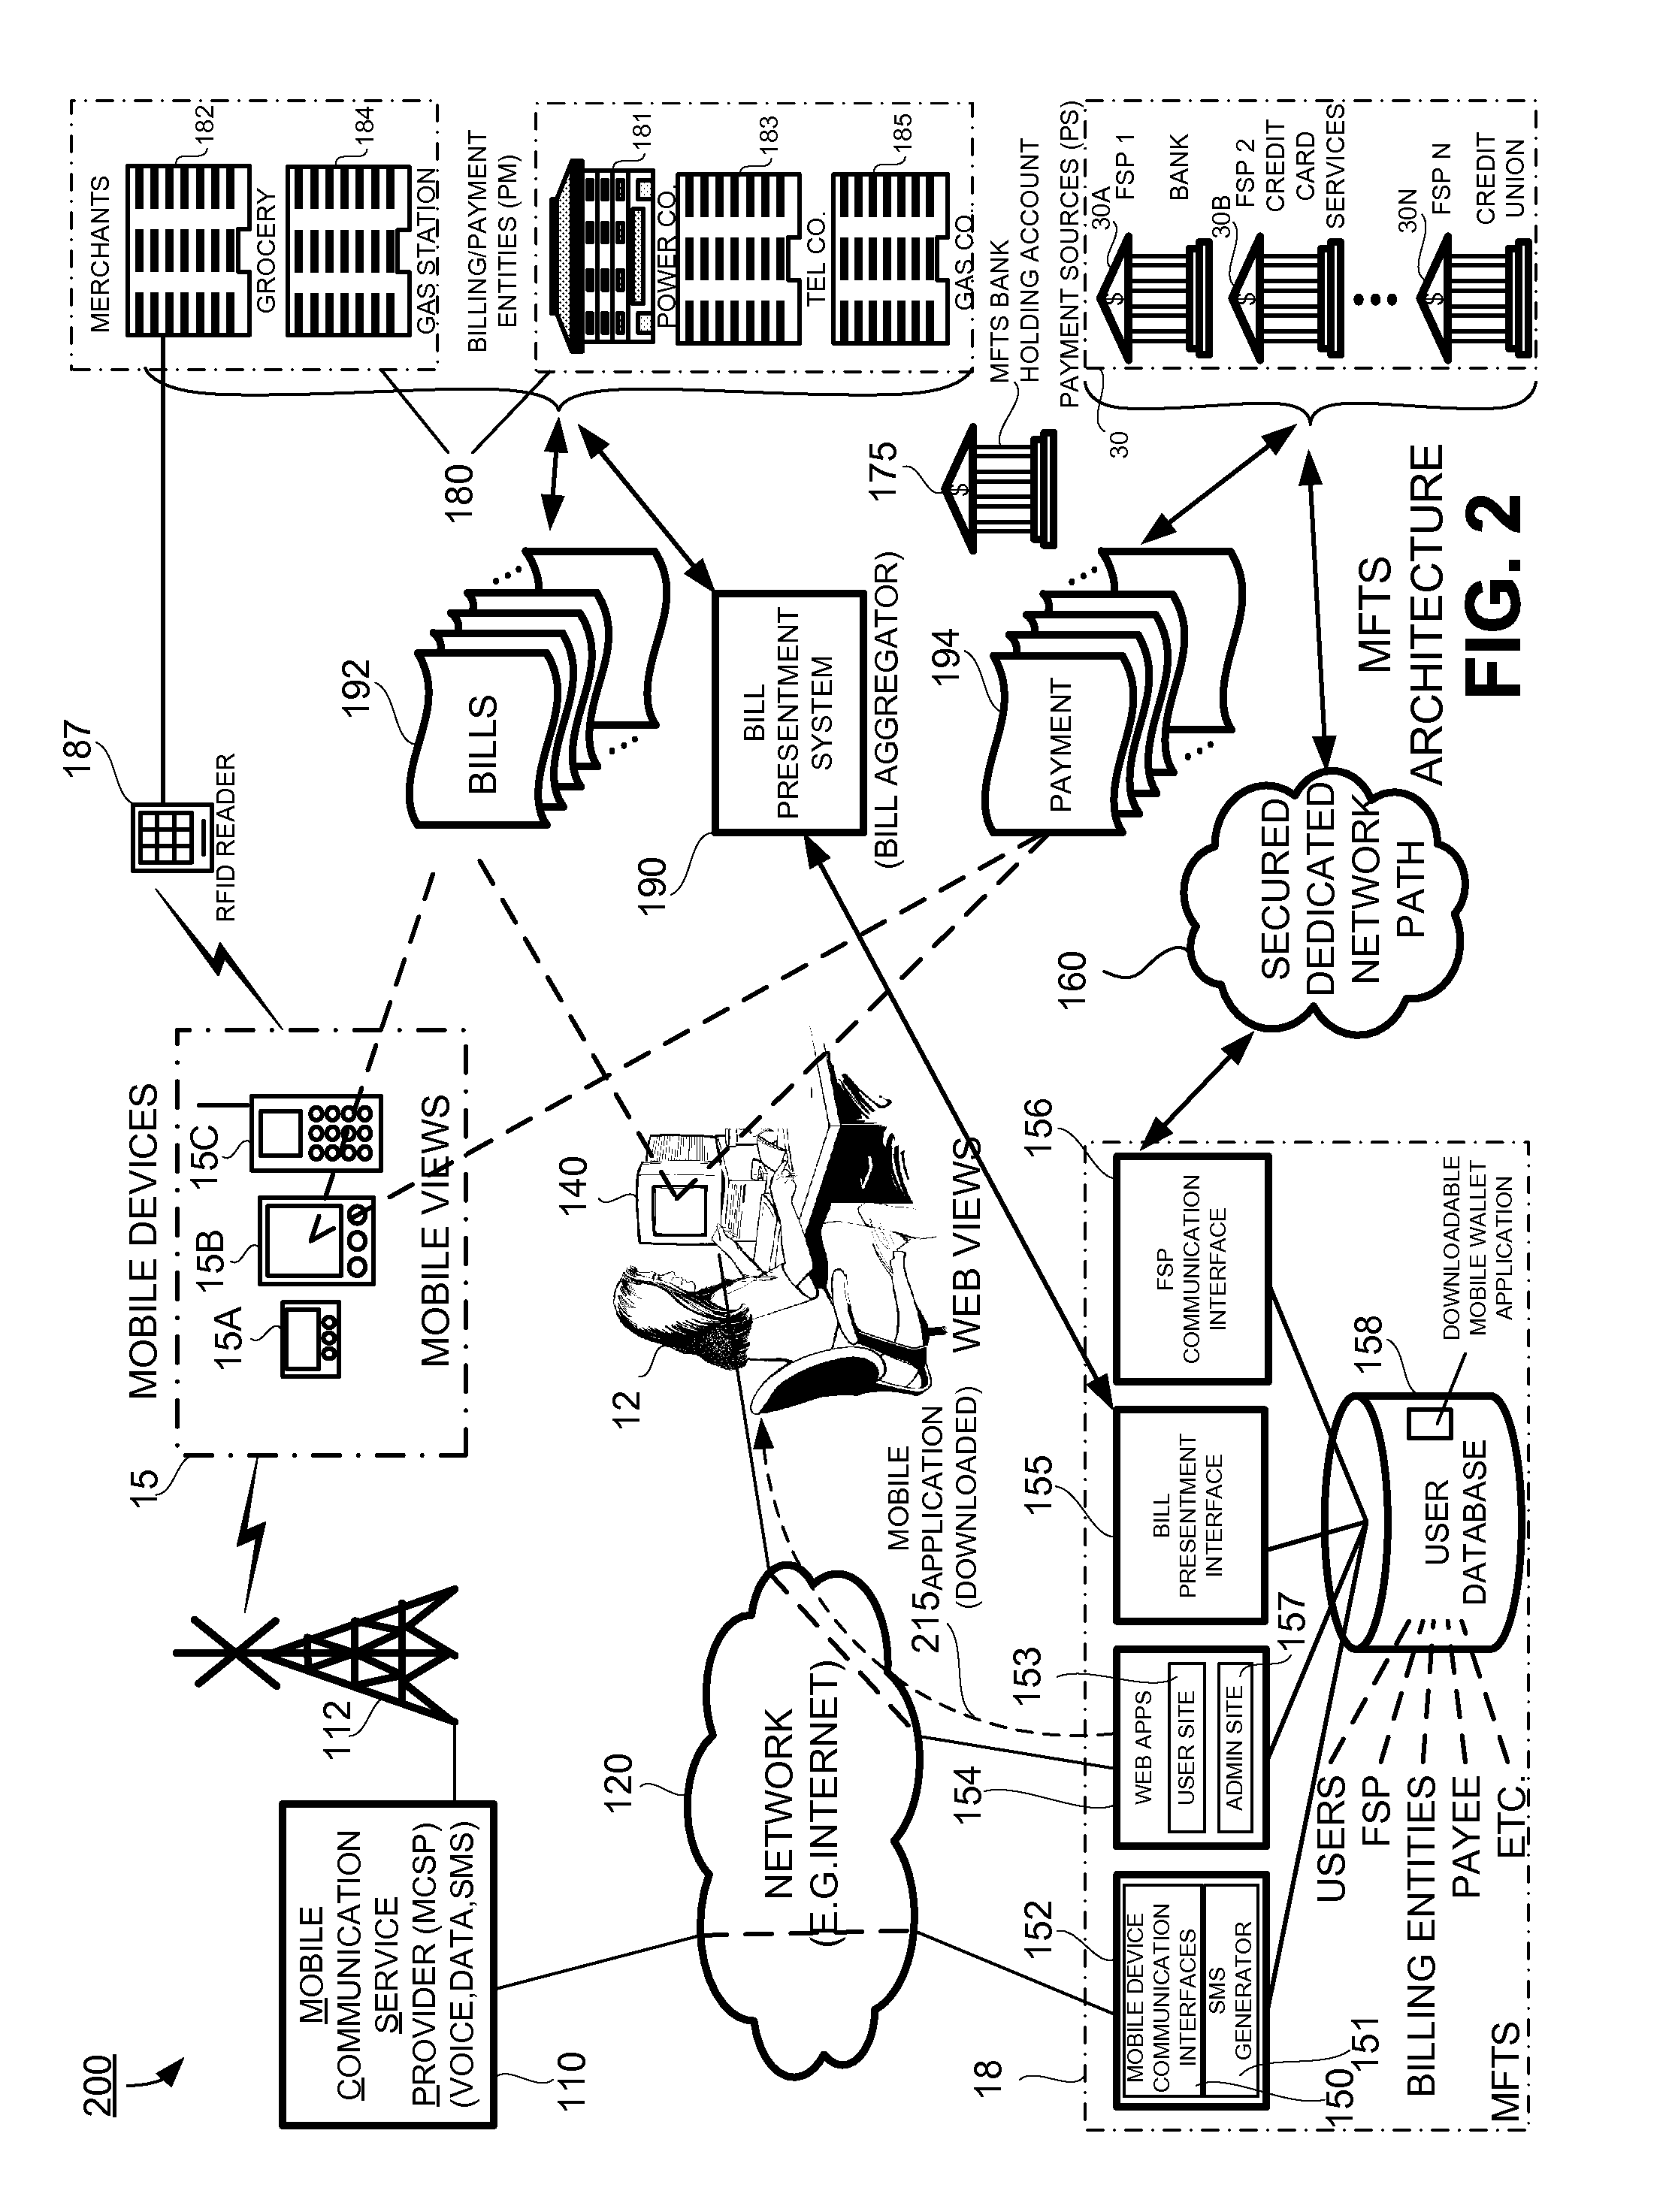 Methods and Systems For Payment Transactions in a Mobile Environment